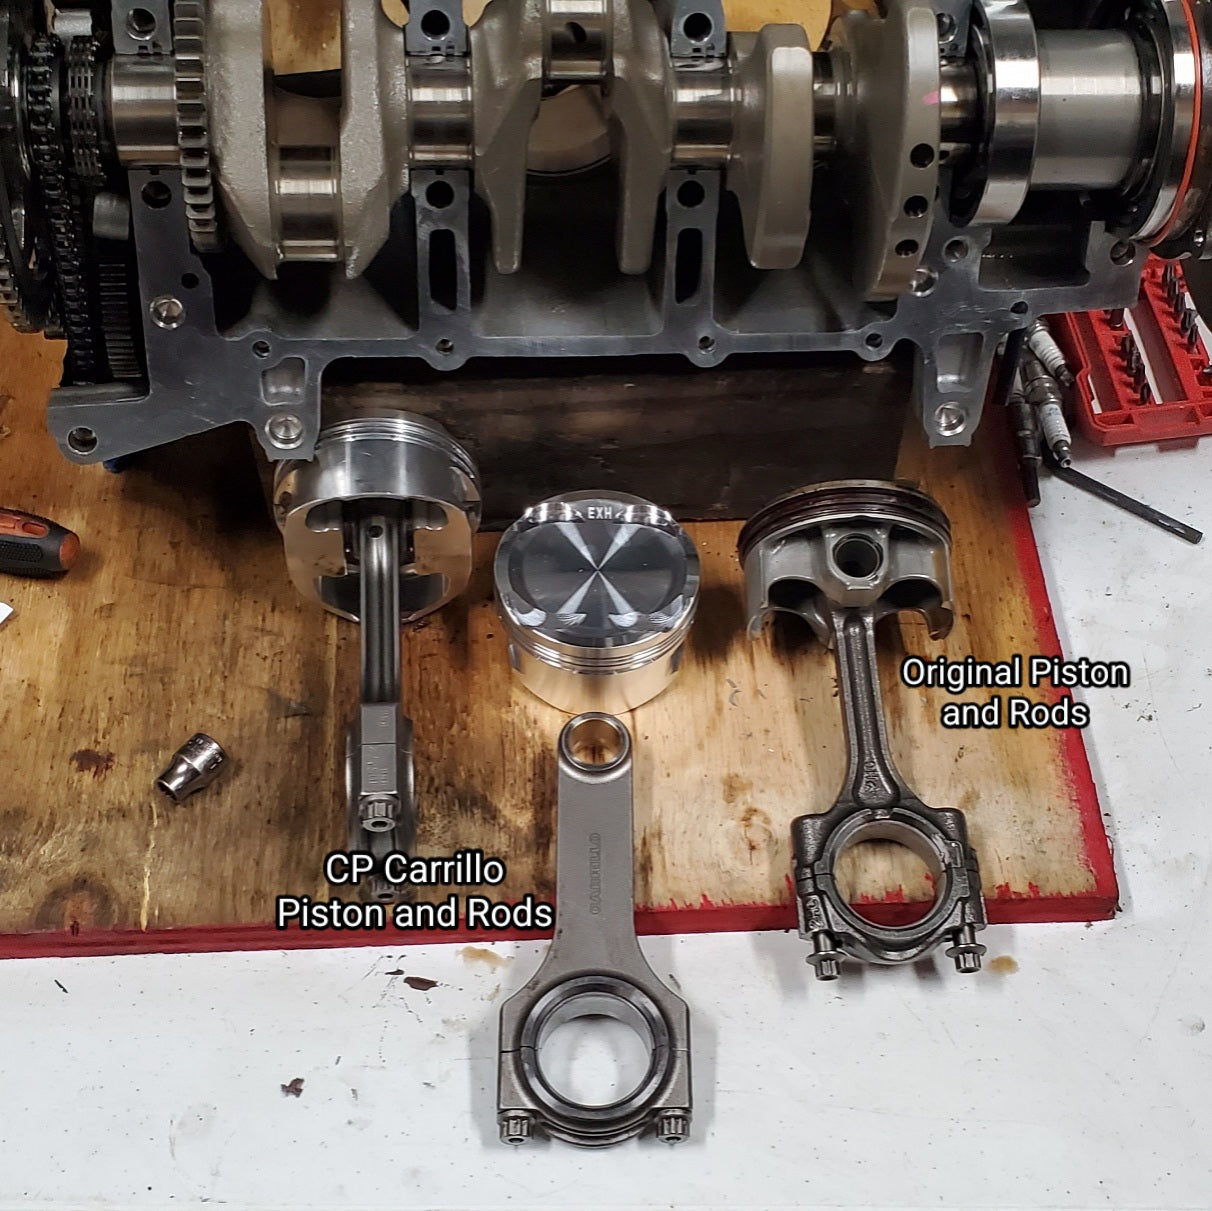 CP-Carrillo 10.5:1 Turbo Pistons and Connecting Rods for Yamaha YXZ1000R